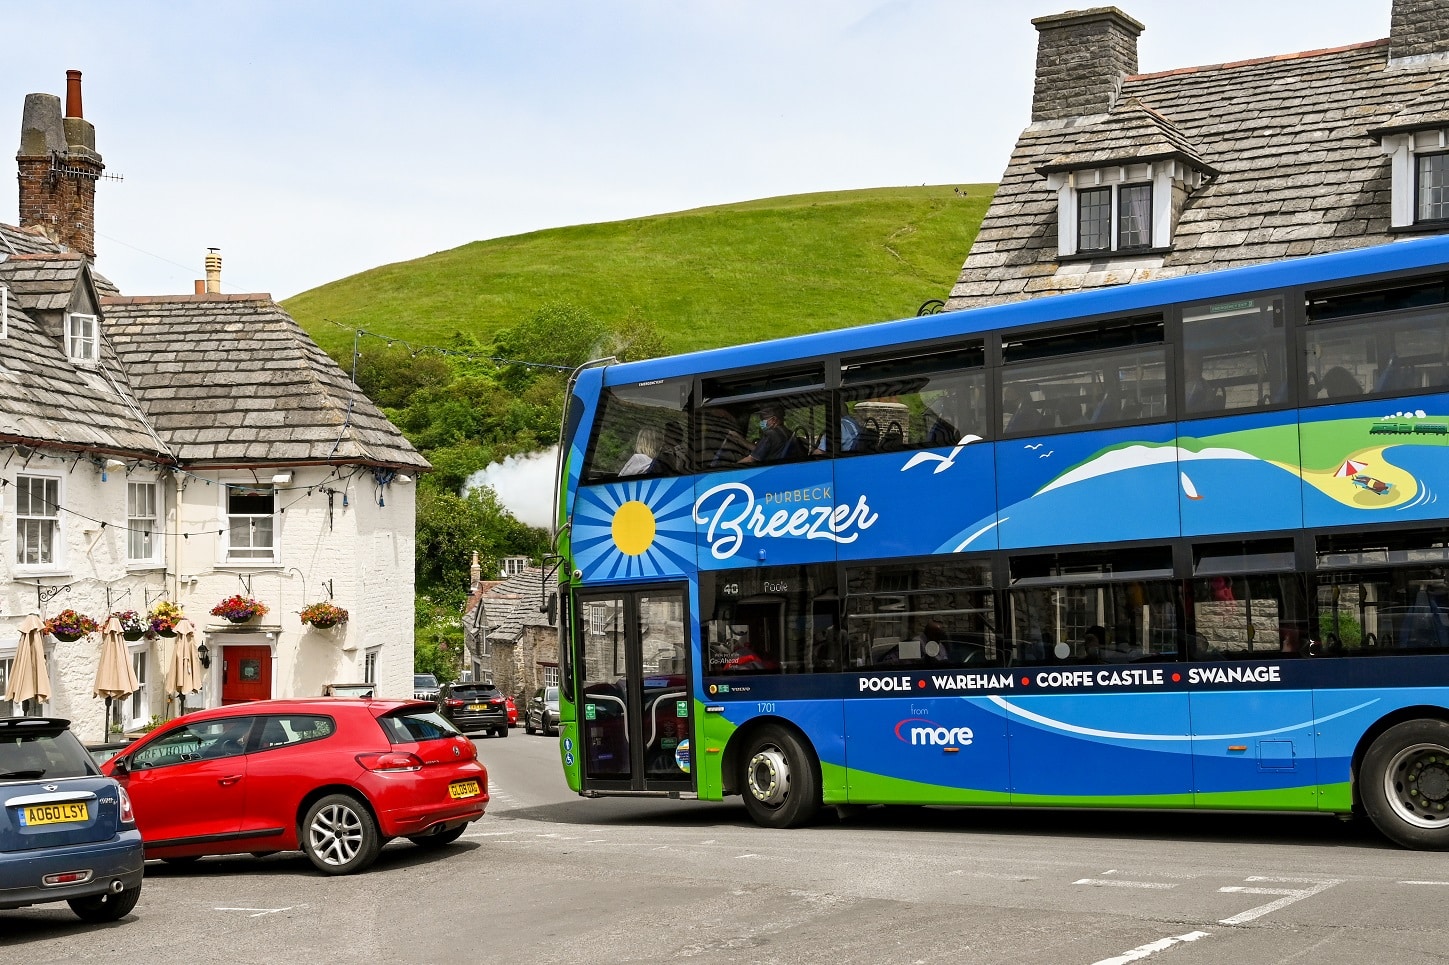 Ministers in England call on bus industry to invest responsibly